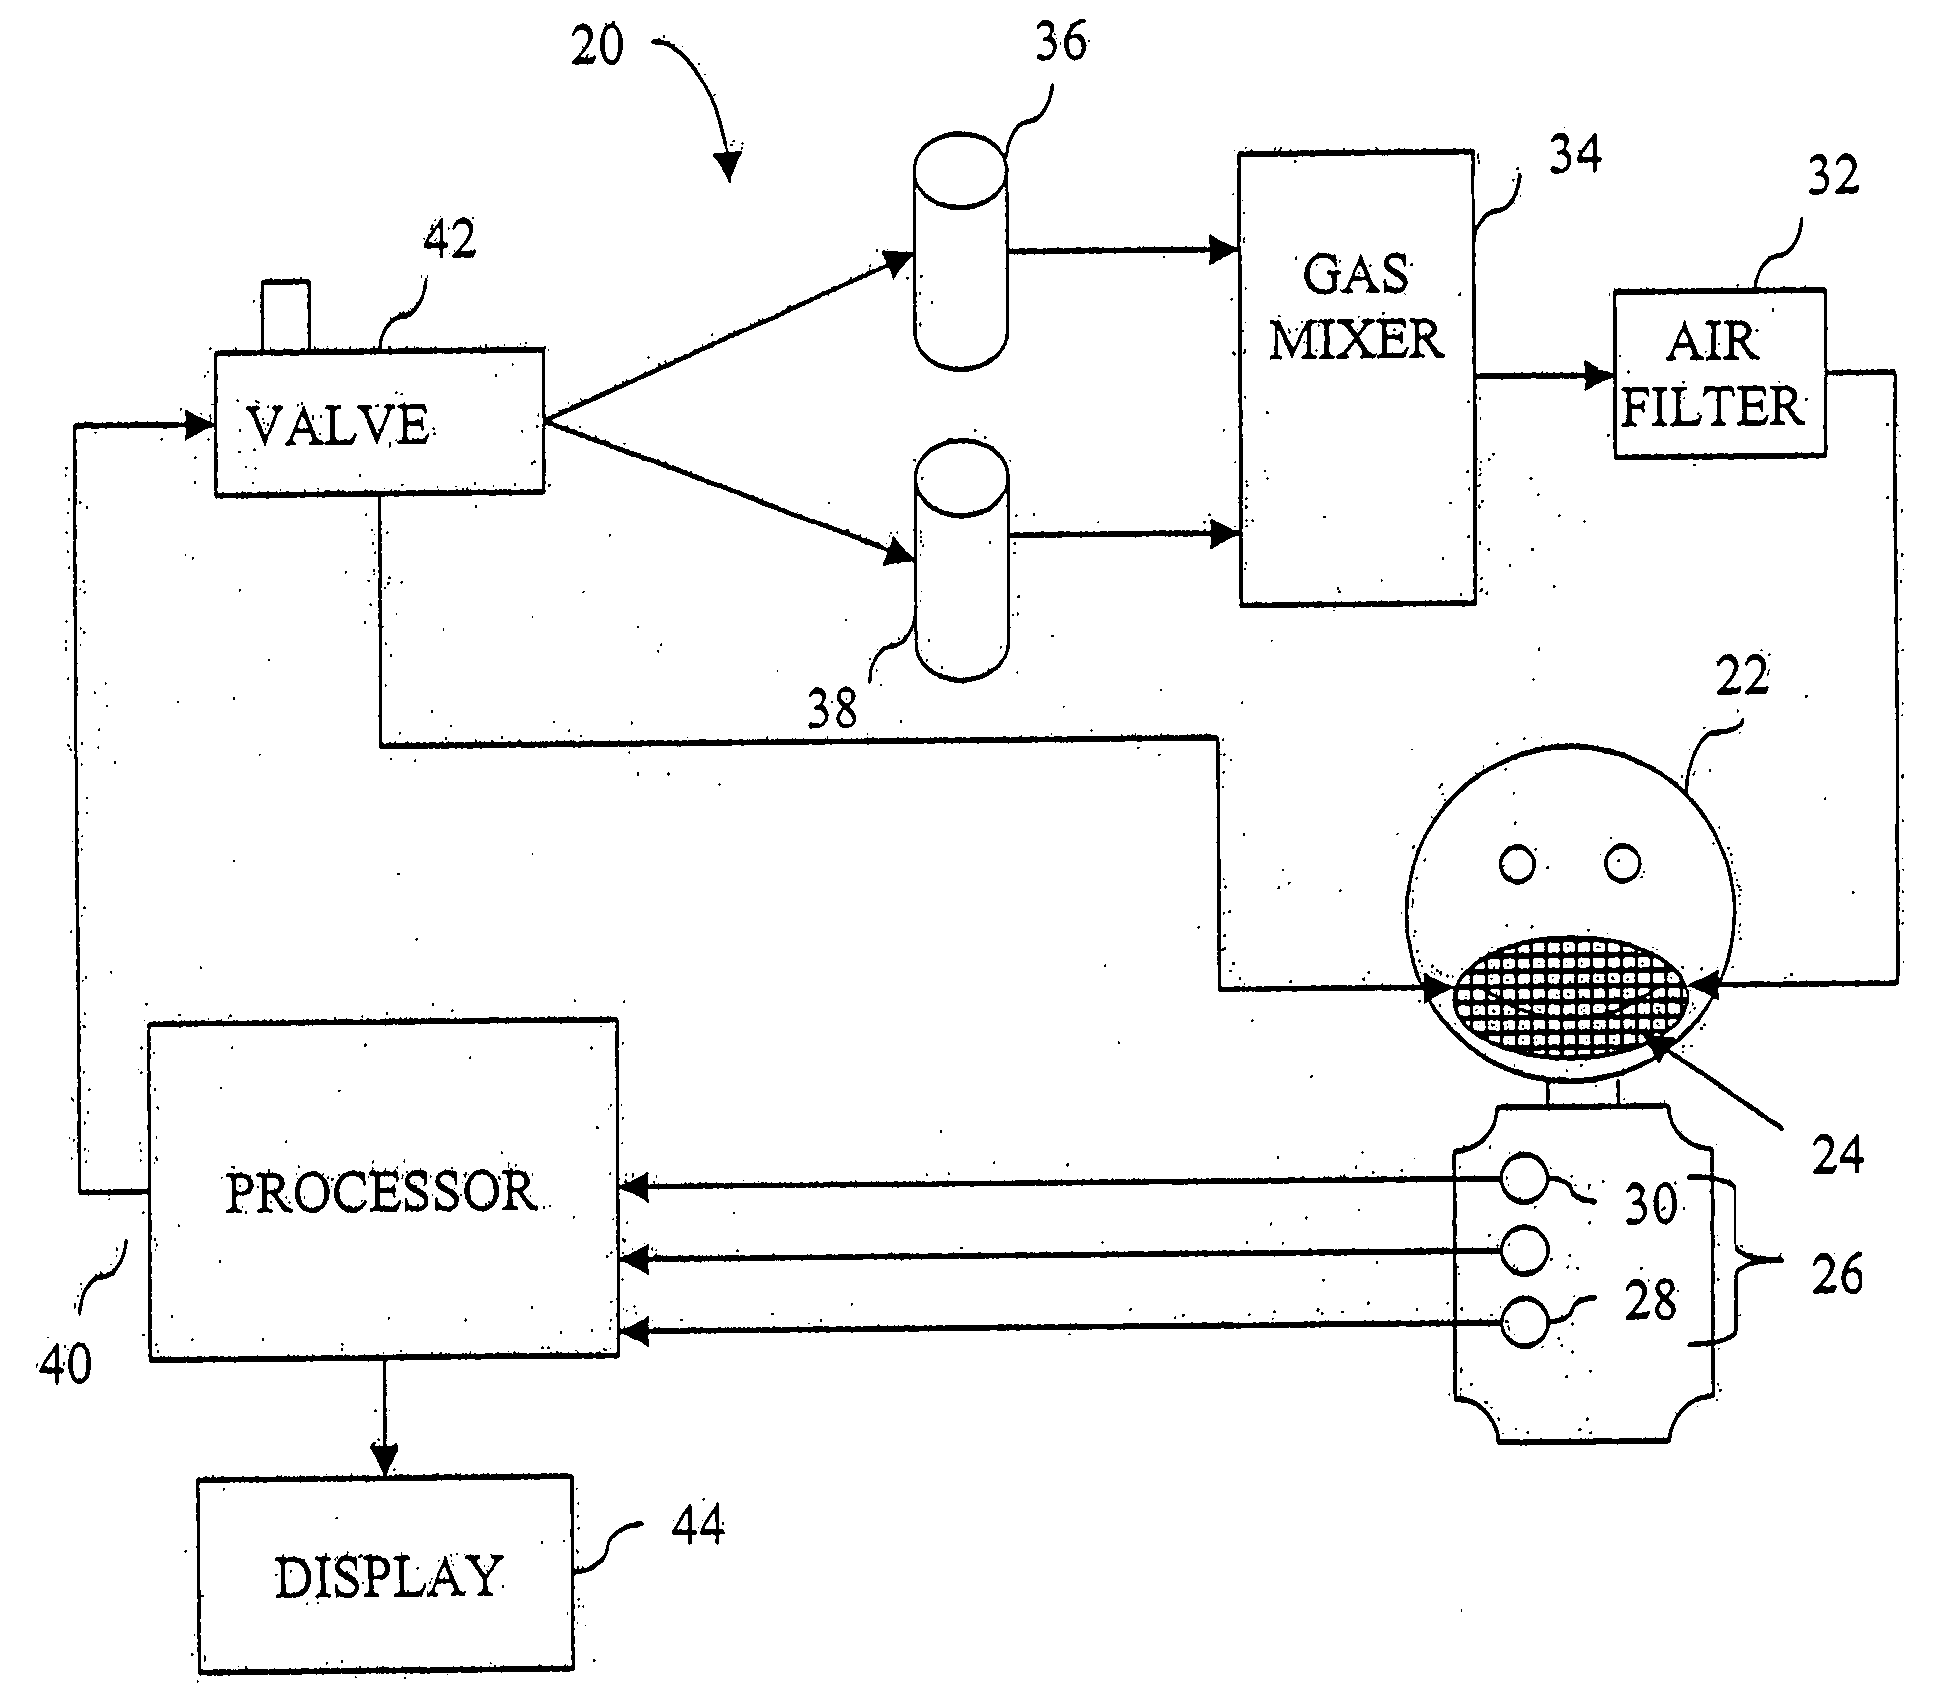 Diagnostic system and methods for detecting disorders in the respiratory control chemoreceptors